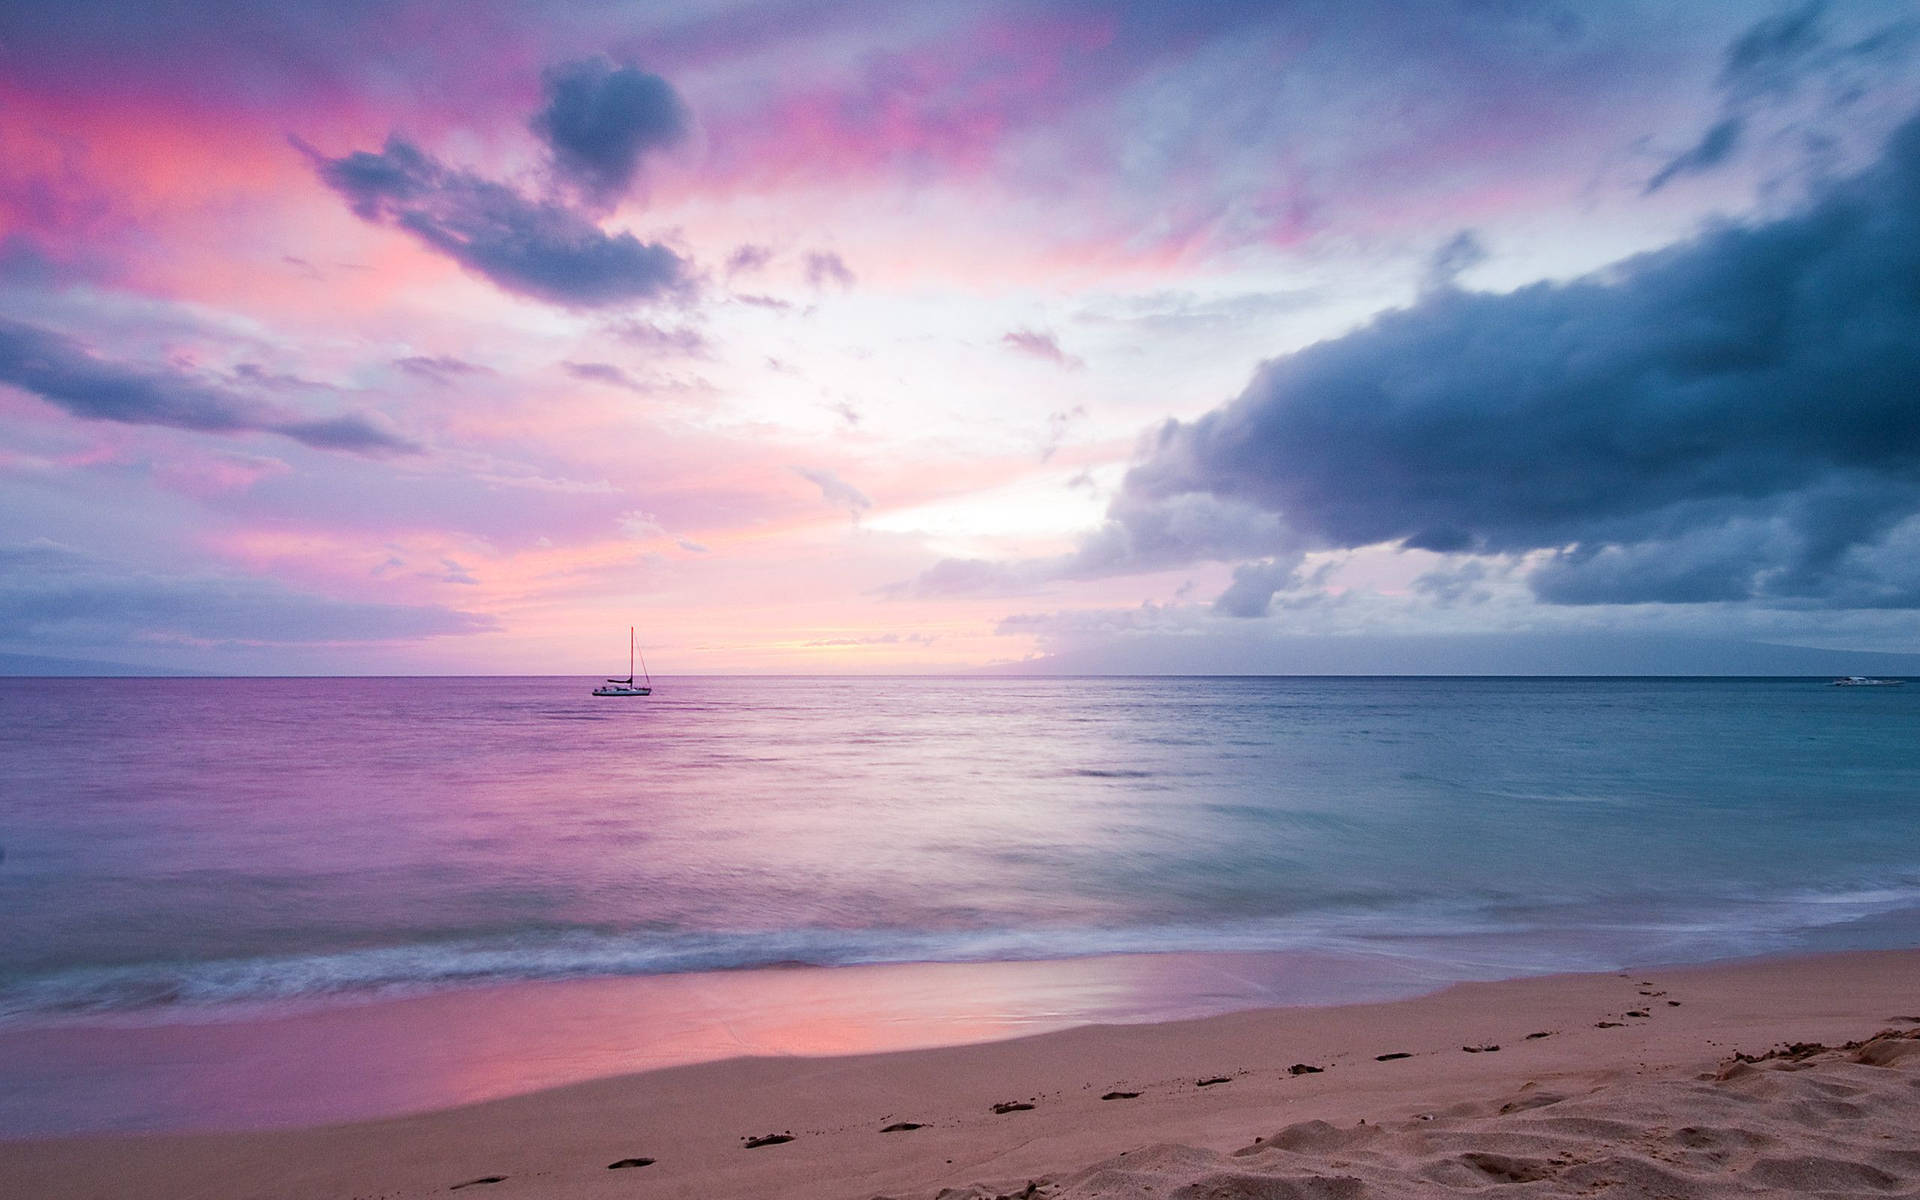 Pink Aesthetic Ocean Sunset With Boat